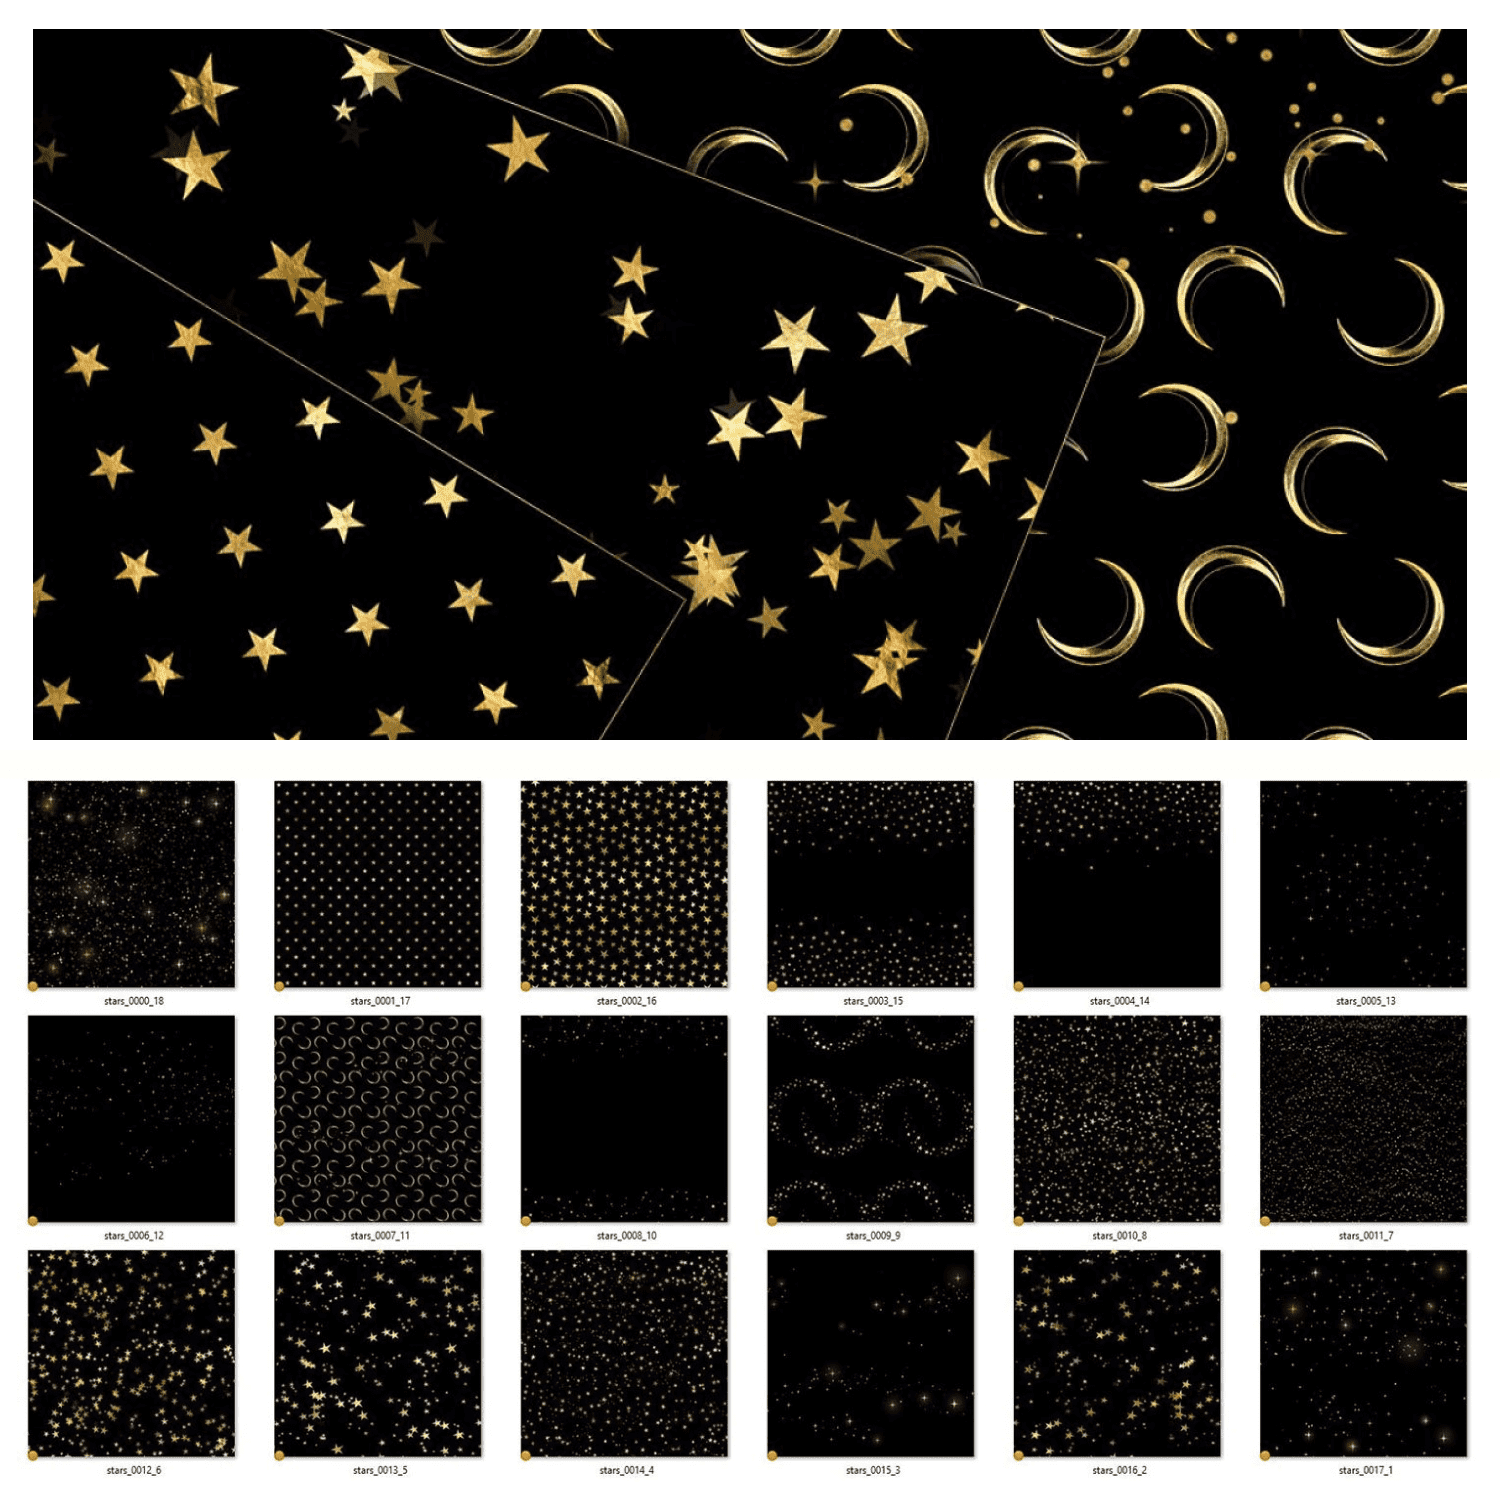 Black and Gold Stars Digital Paper cover.